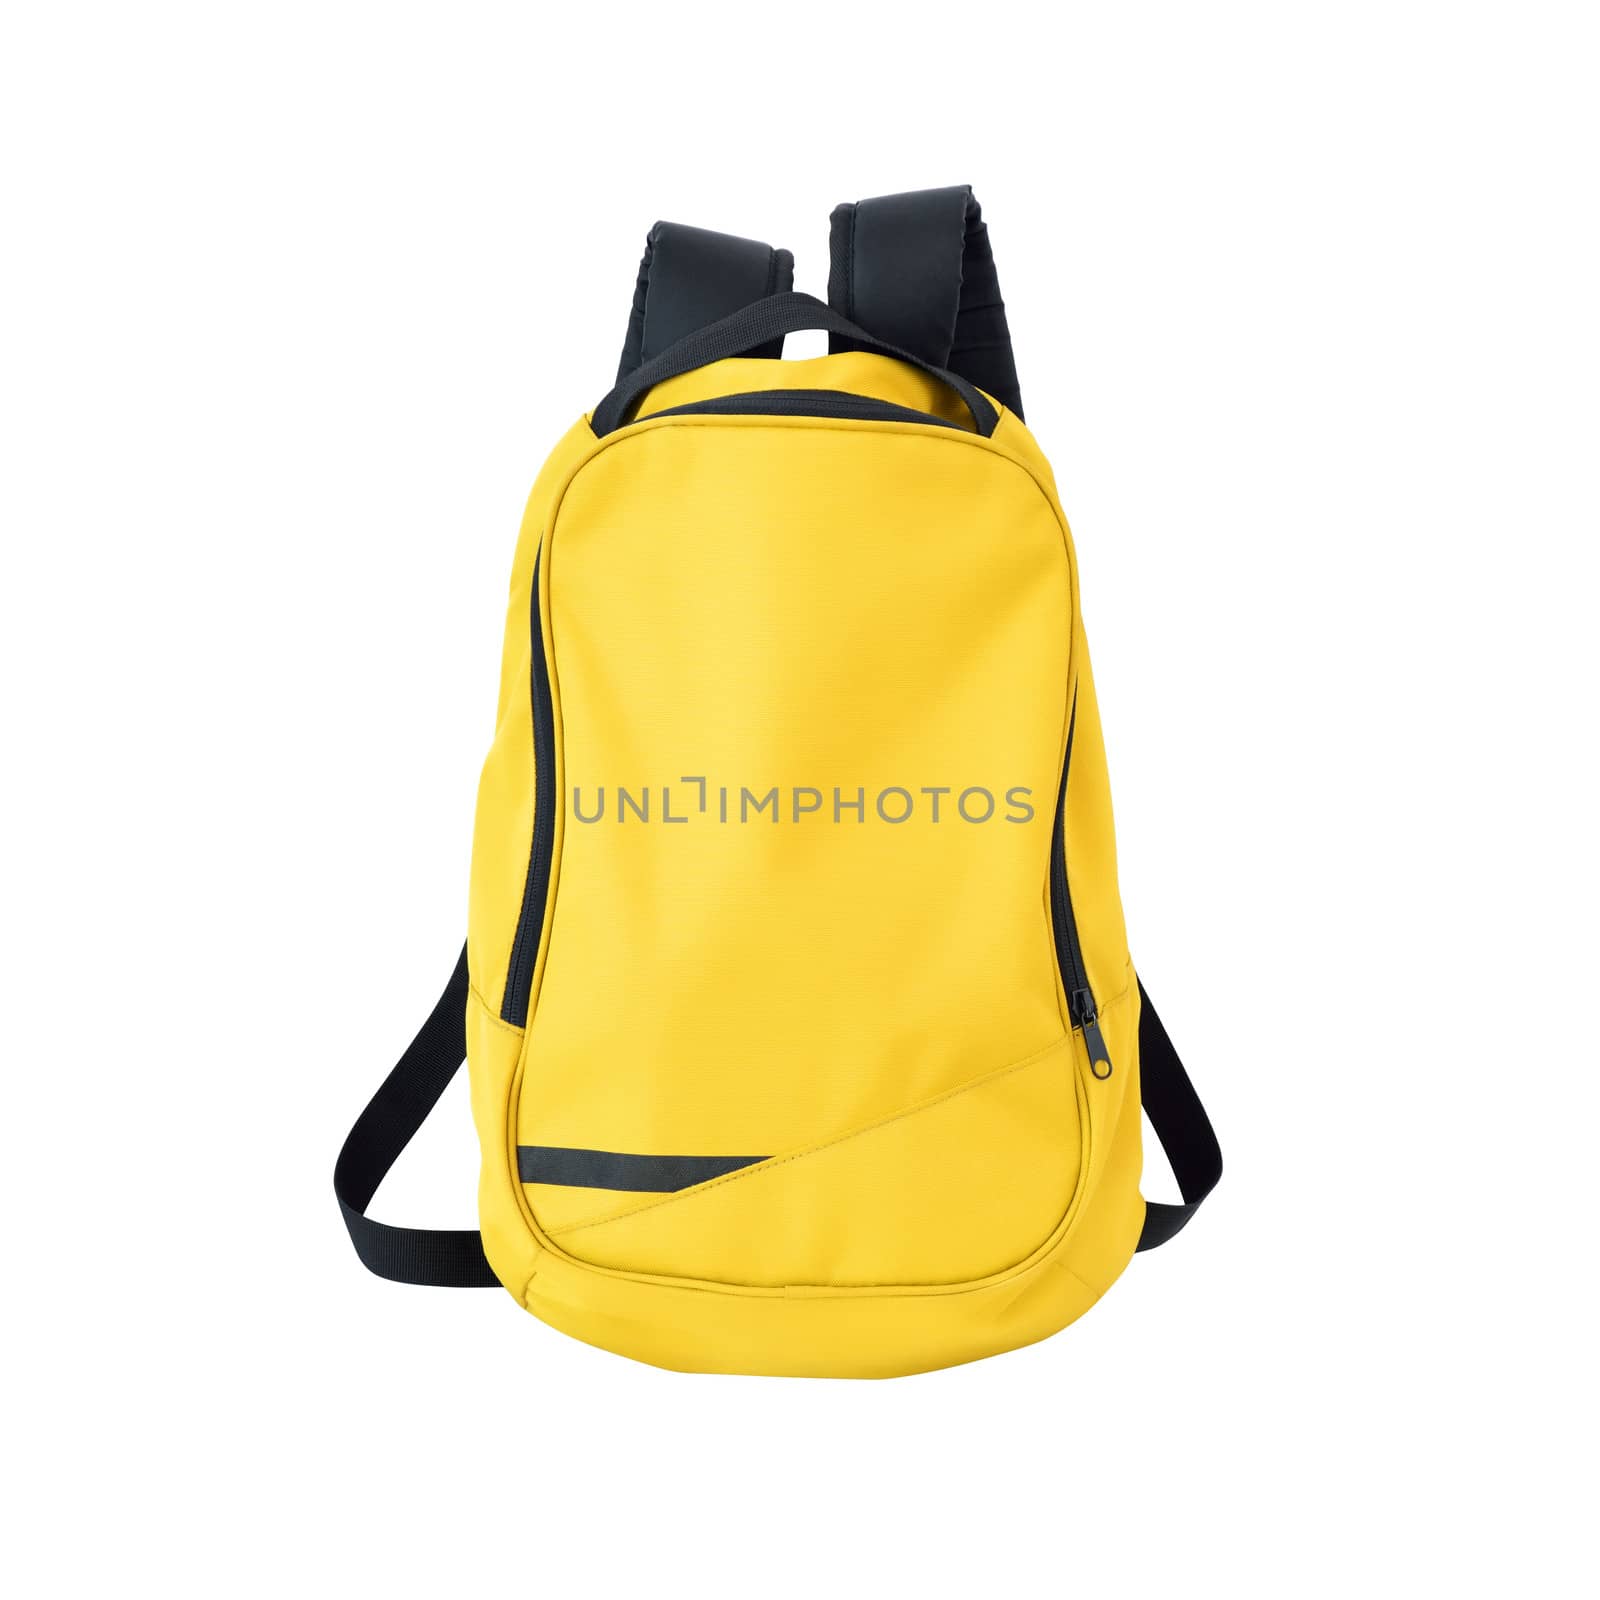 A high-resolution image of an isolated yellow-colored rucksack on white background. High-quality clipping path included.